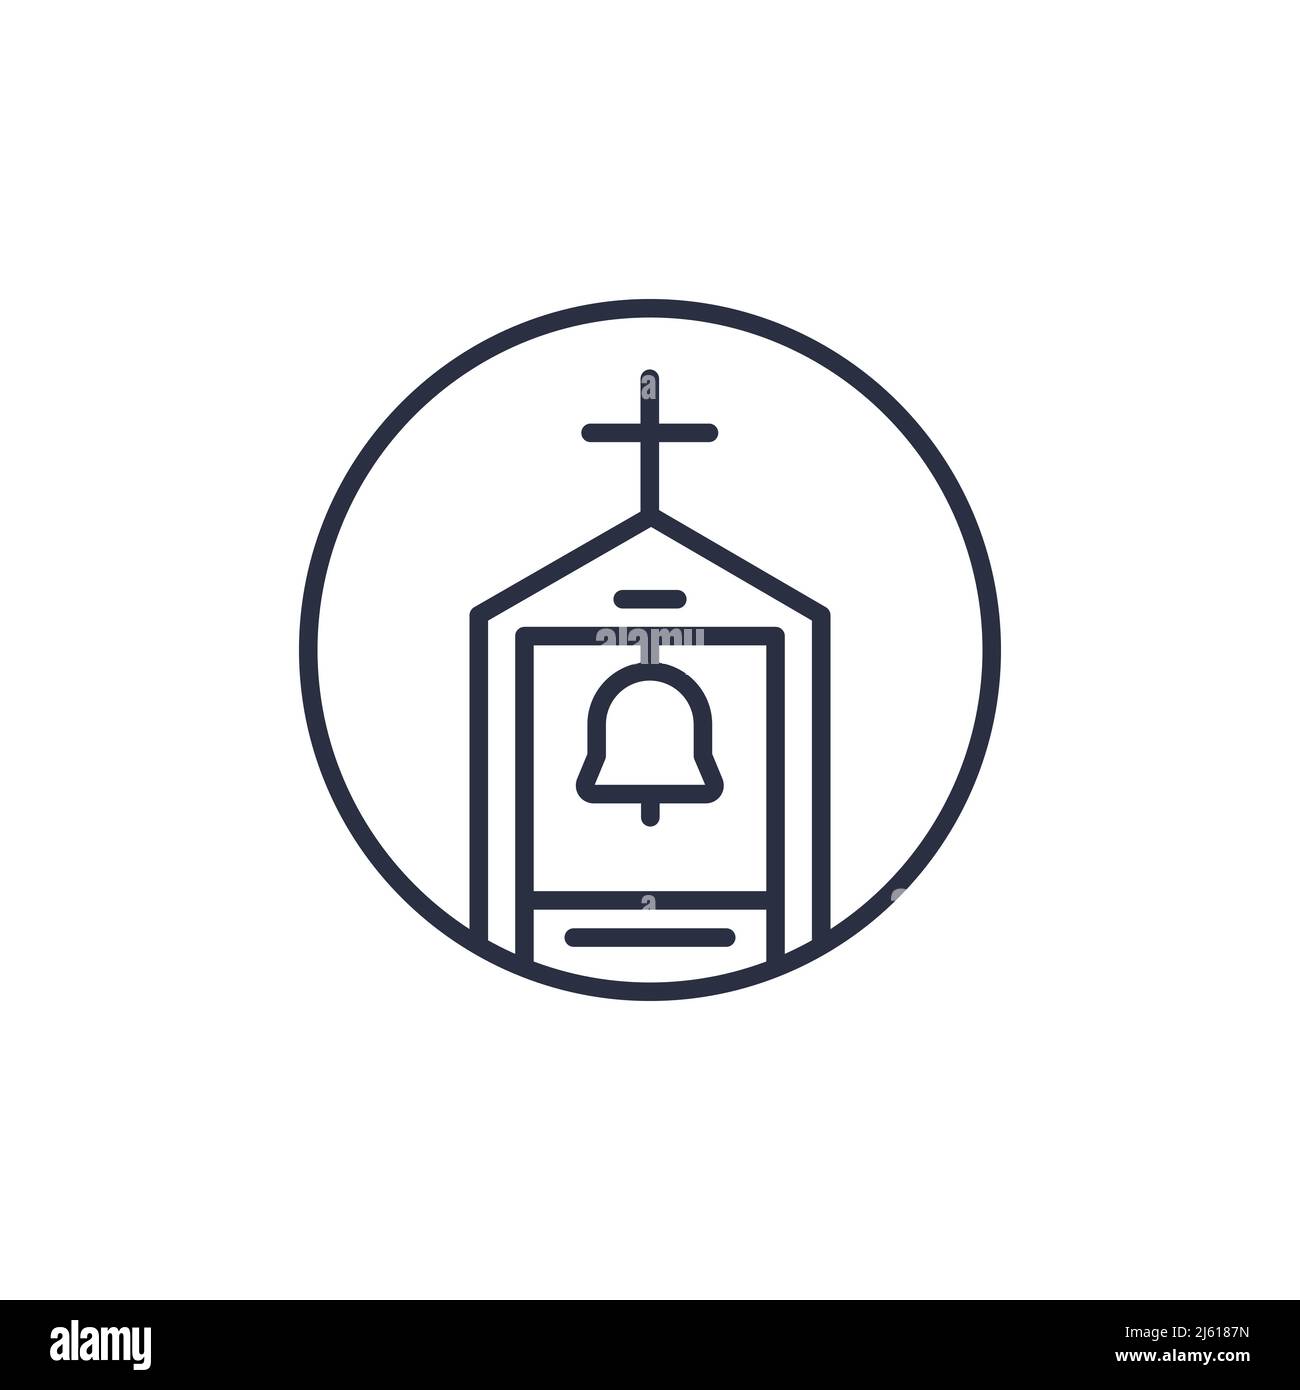 belfry line icon on white Stock Vector